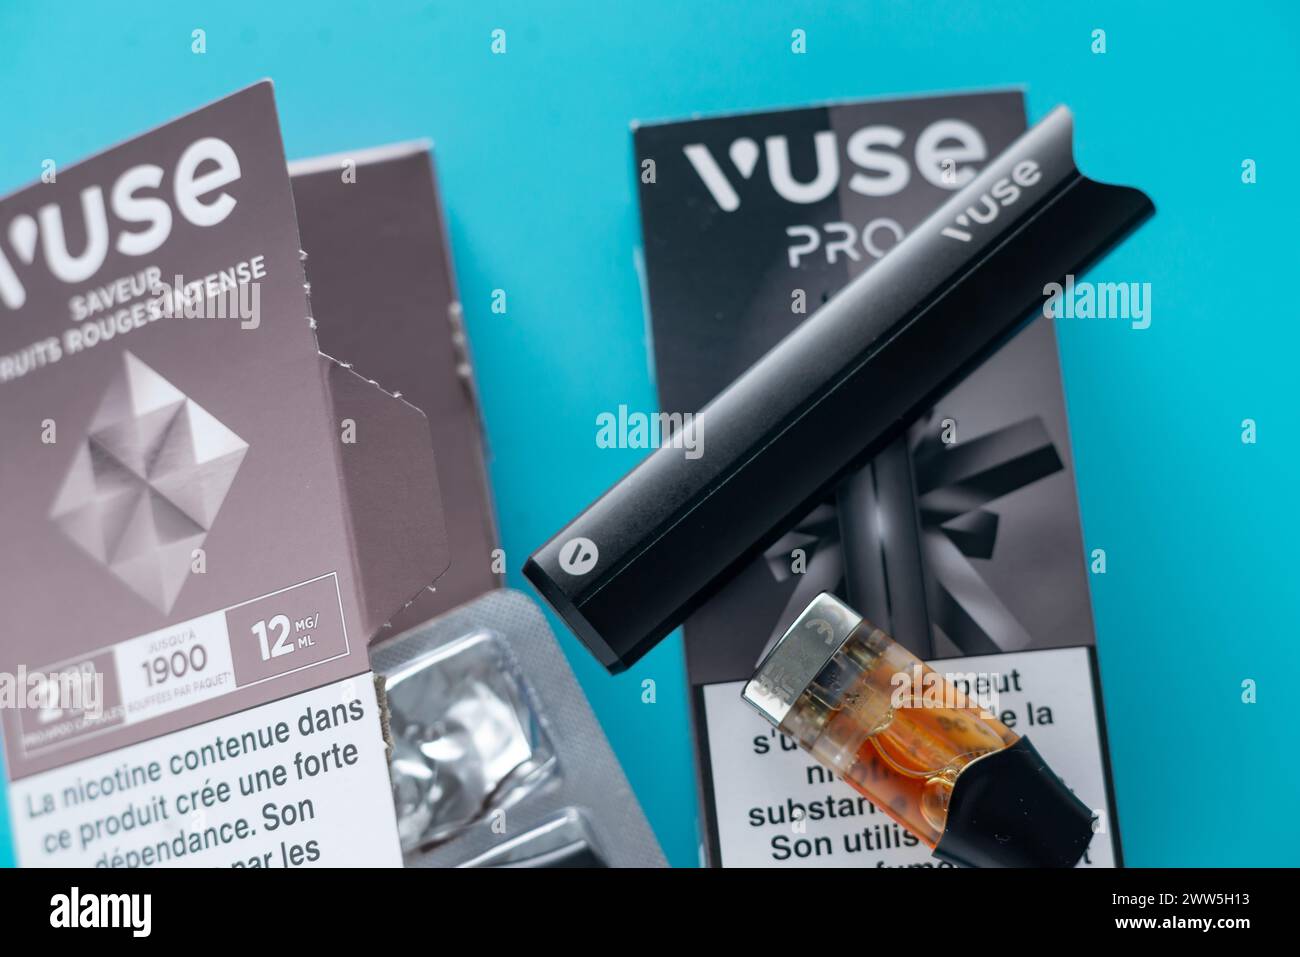 Caen, France - March 18, 2024: A vape and a box of vape juice sit on a blue surface. The box is labeled with the brand name VUSE Pro Stock Photo